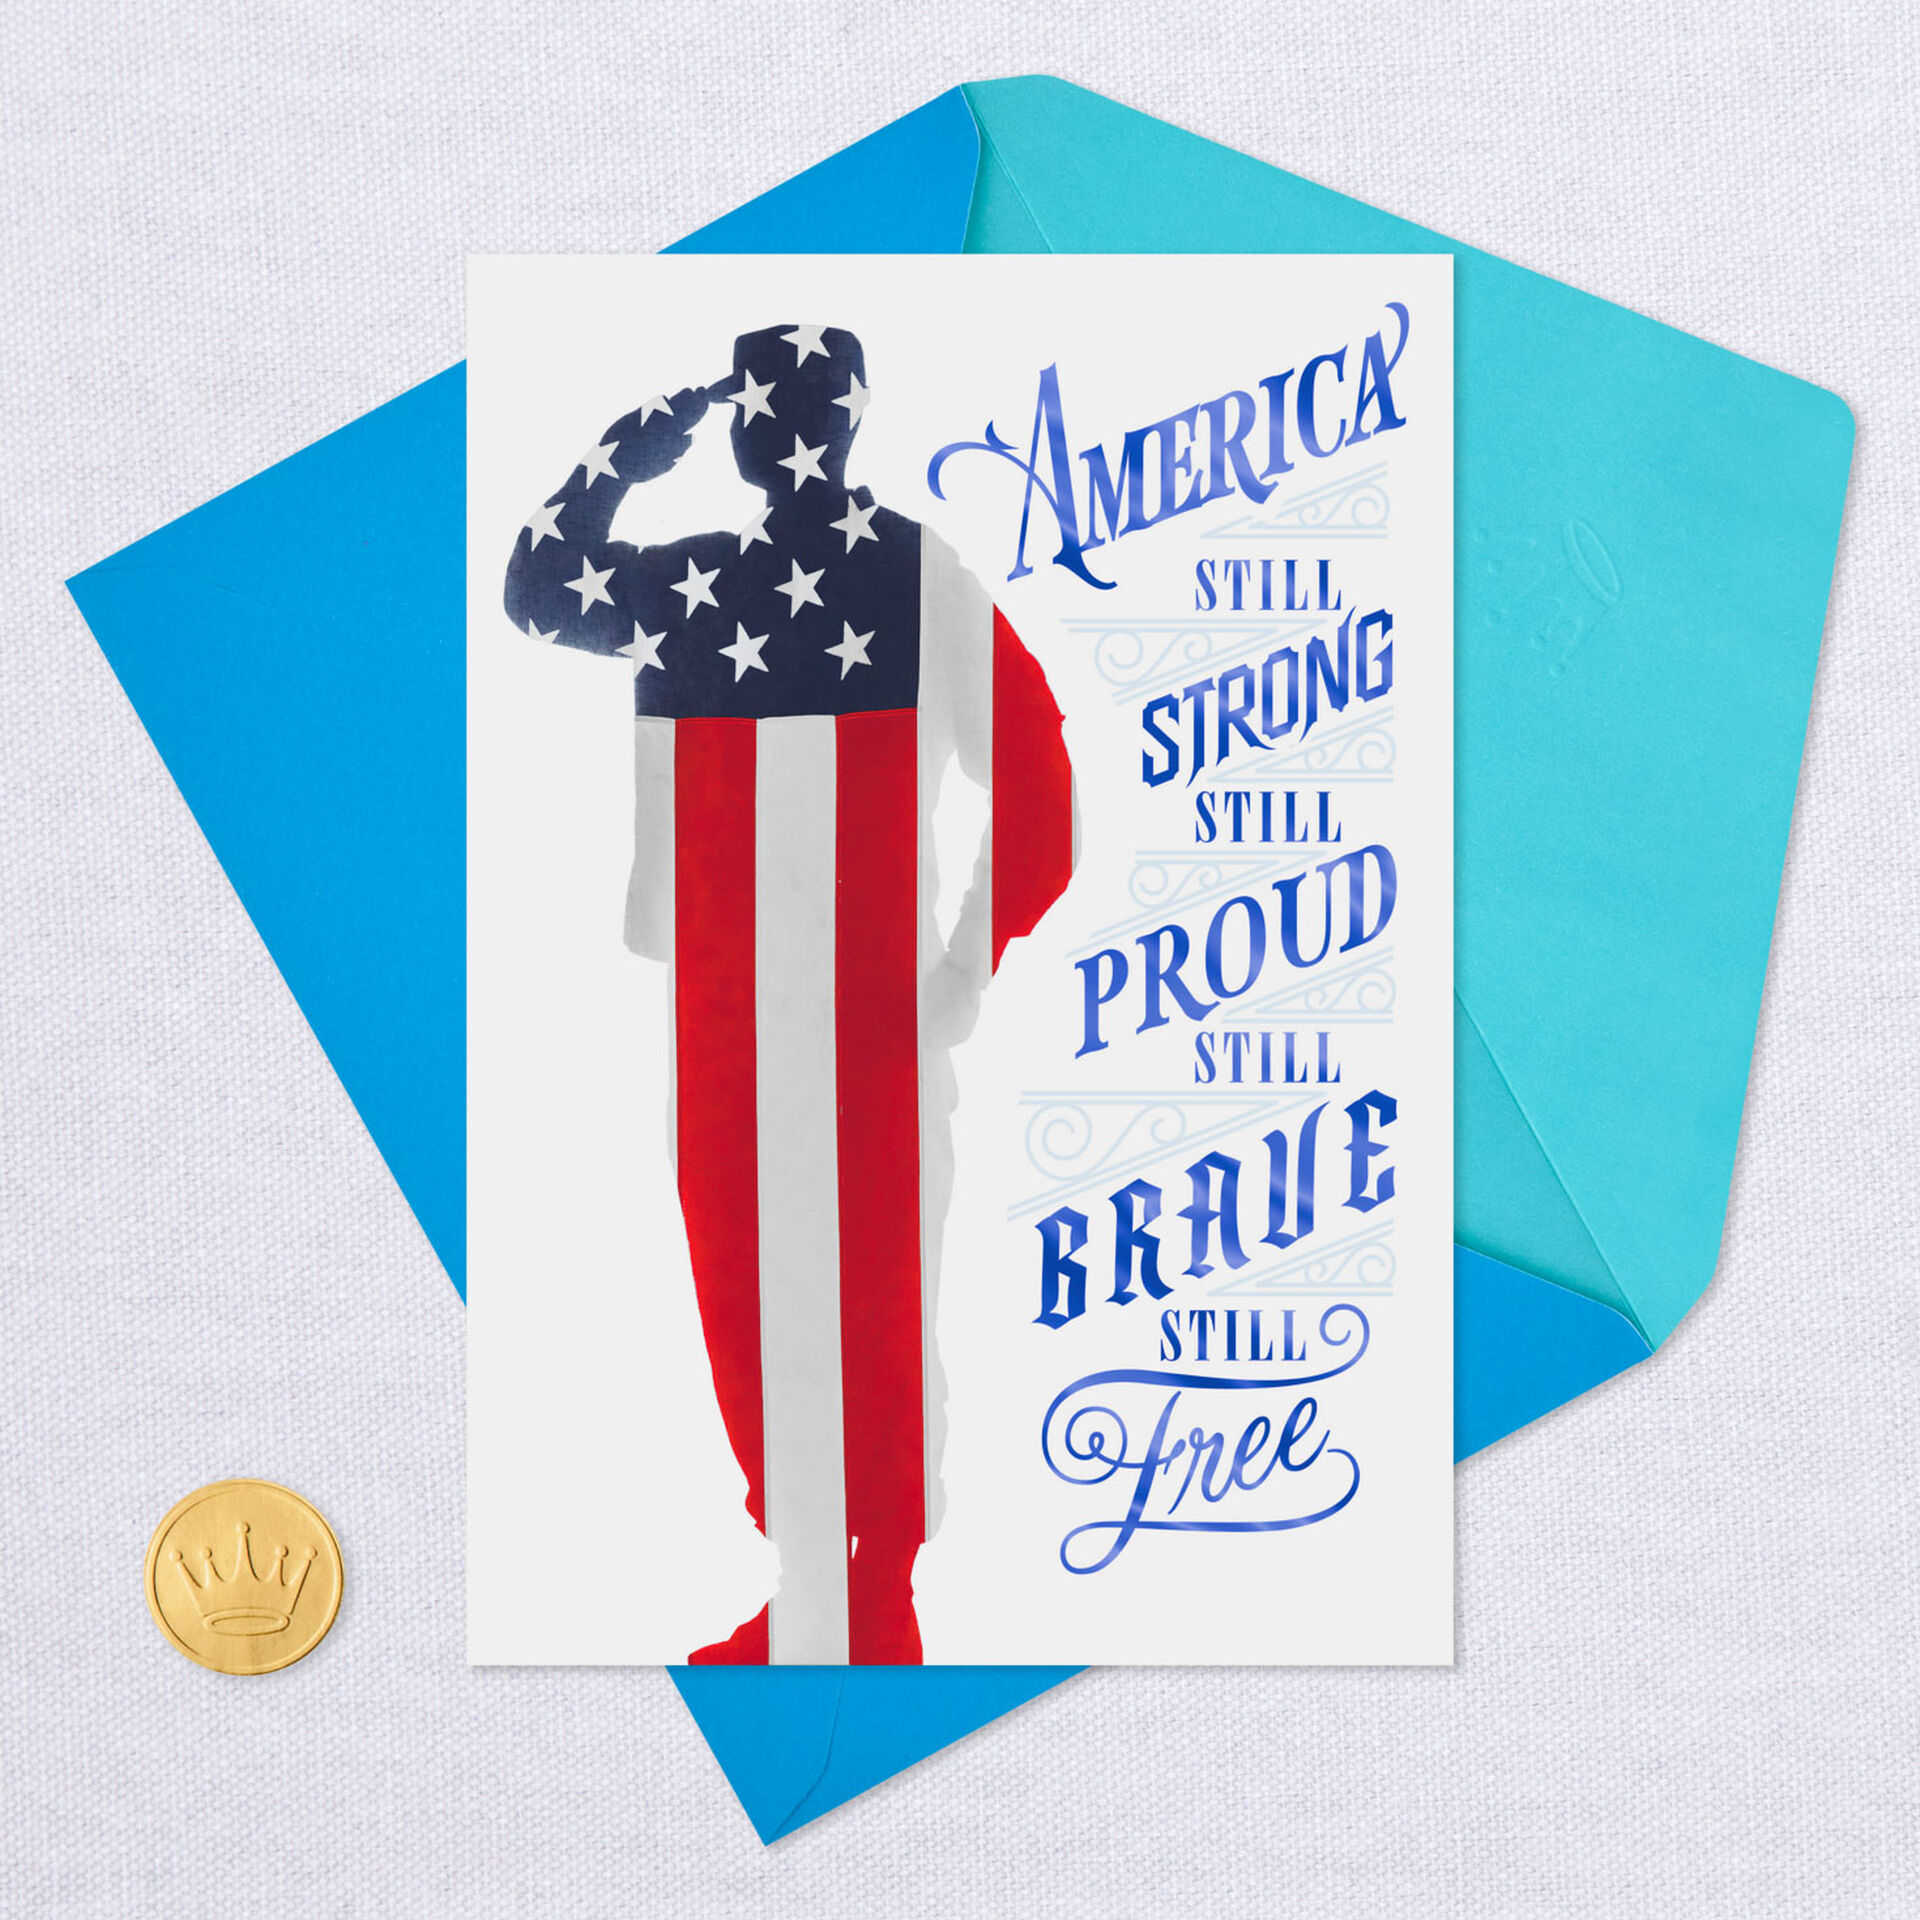 strong-proud-brave-free-veterans-day-card-greeting-cards-hallmark